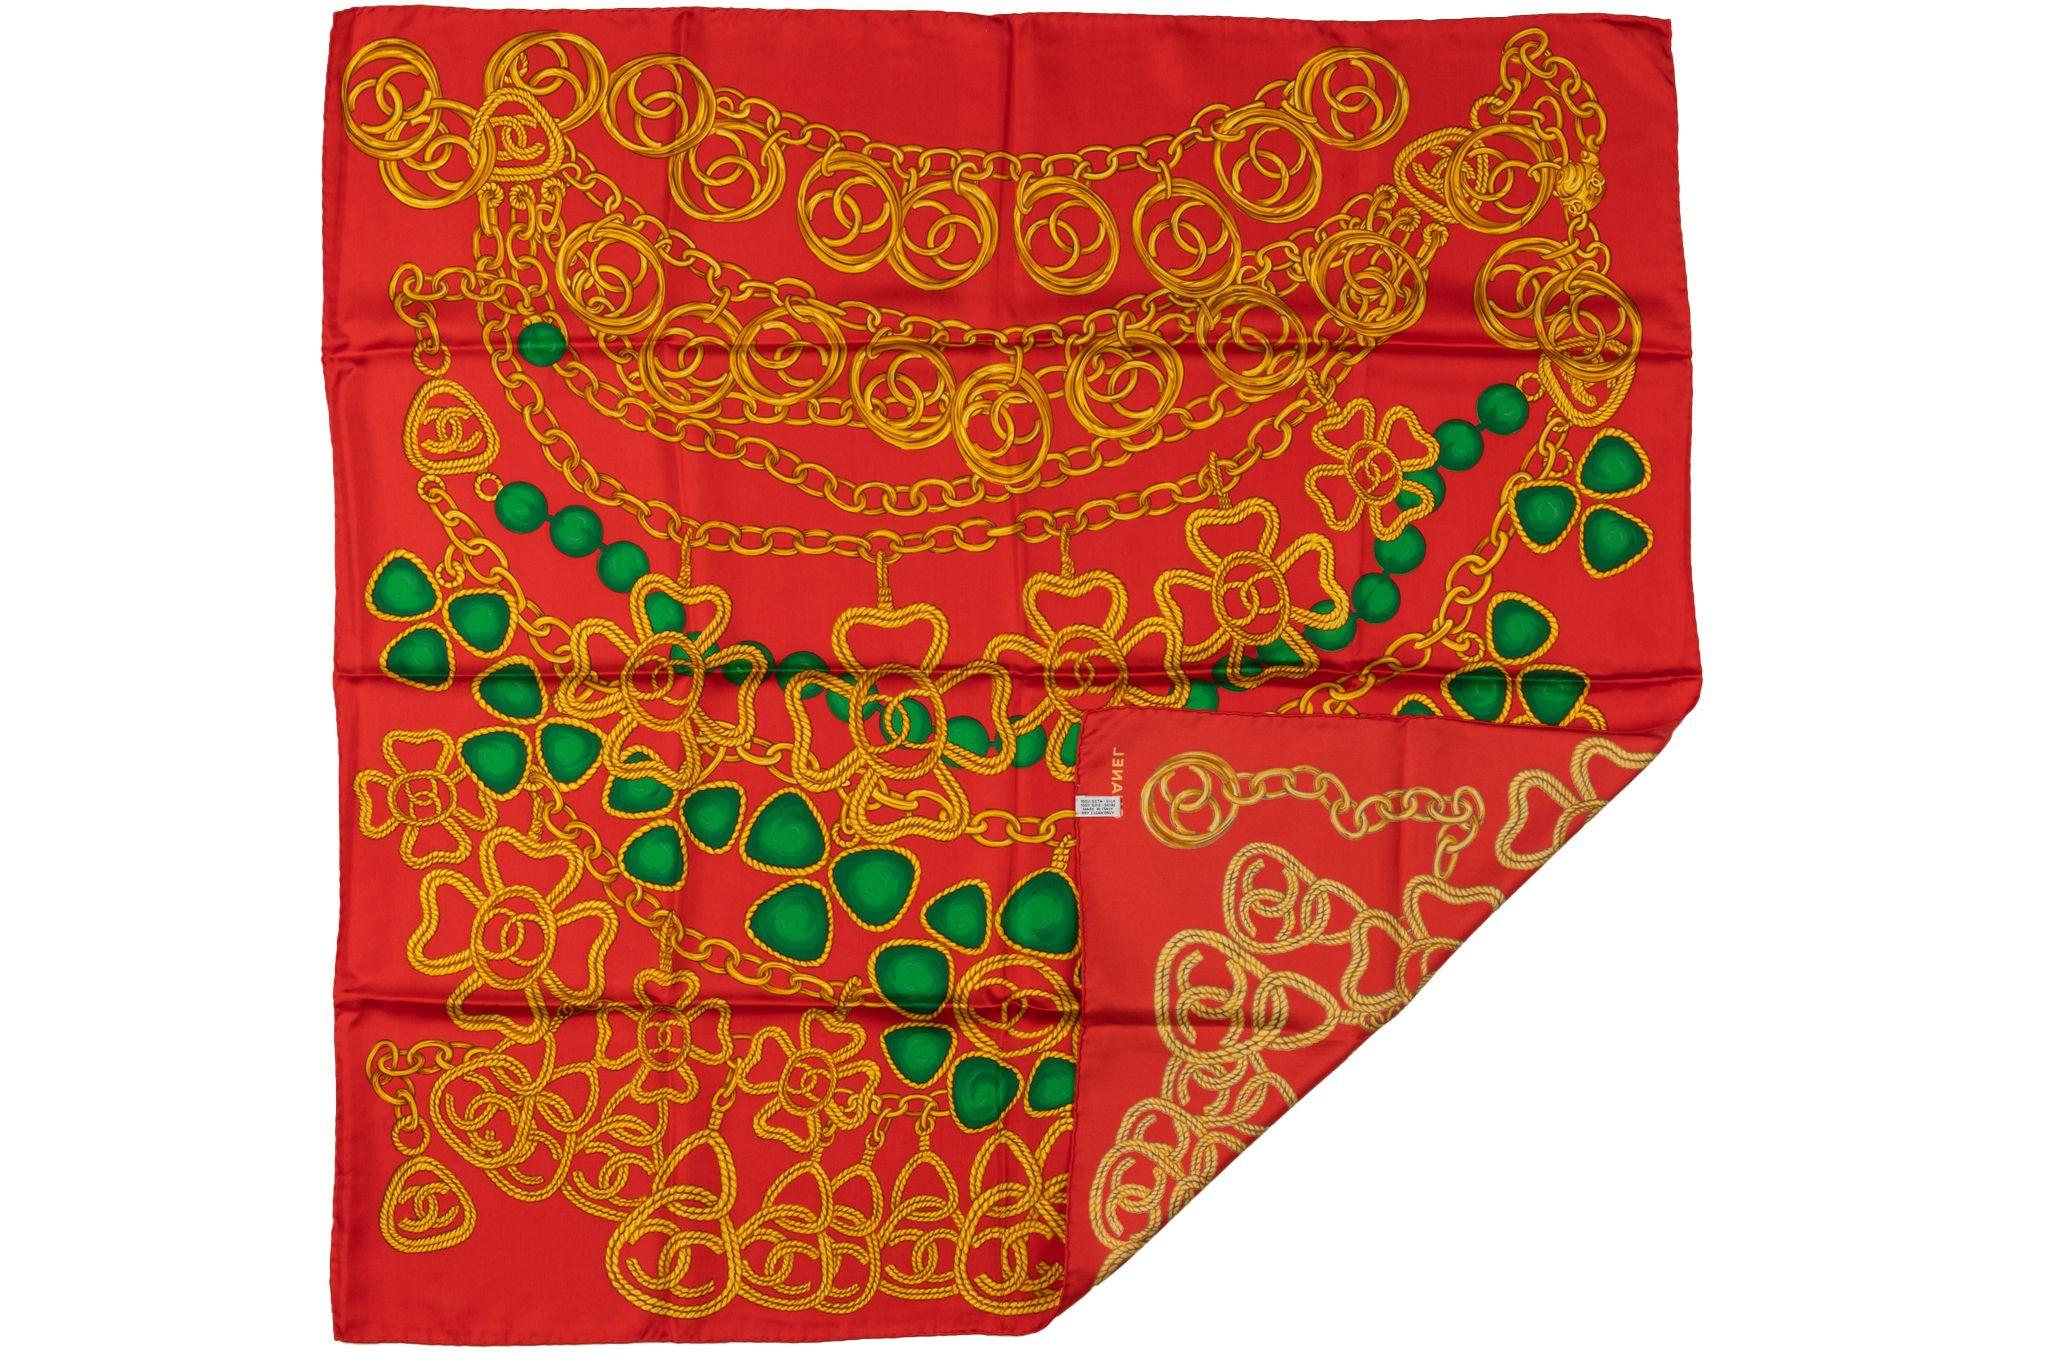 Chanel 80s vintage red silk scarf with chanel gripoix and chain jewelry design. Minor wear.